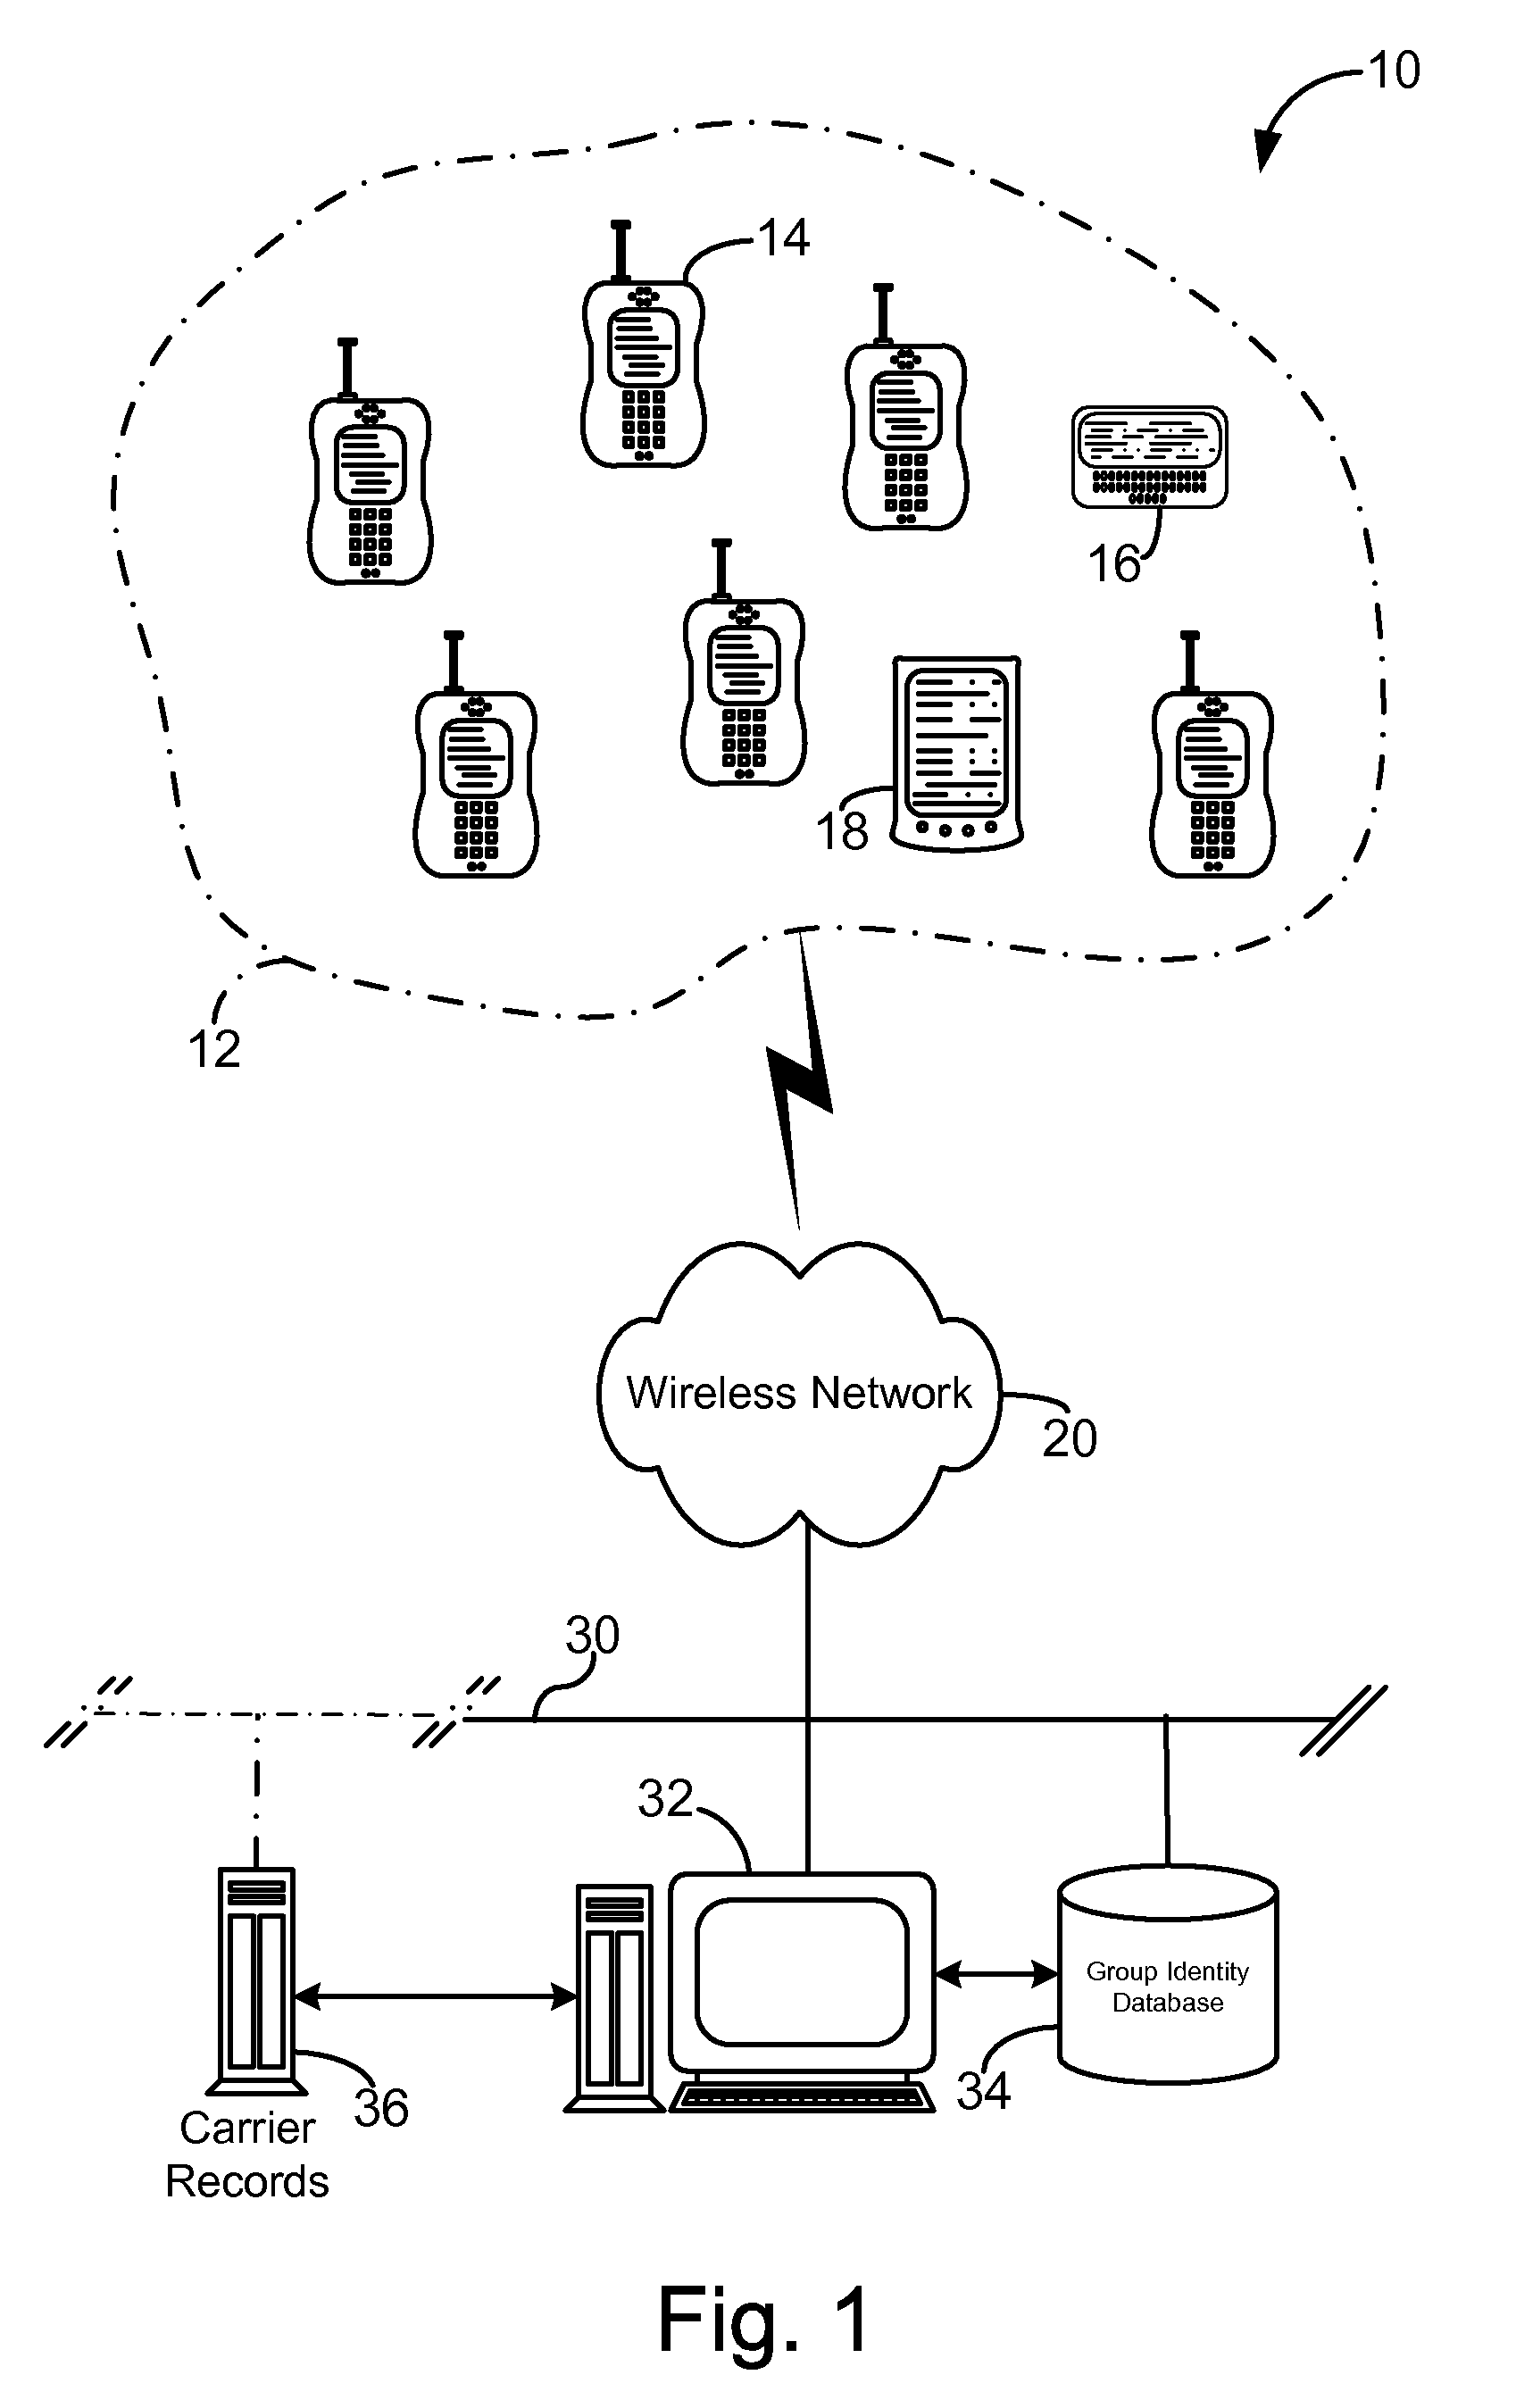 Database architecture for supporting group communications among wireless communication devices